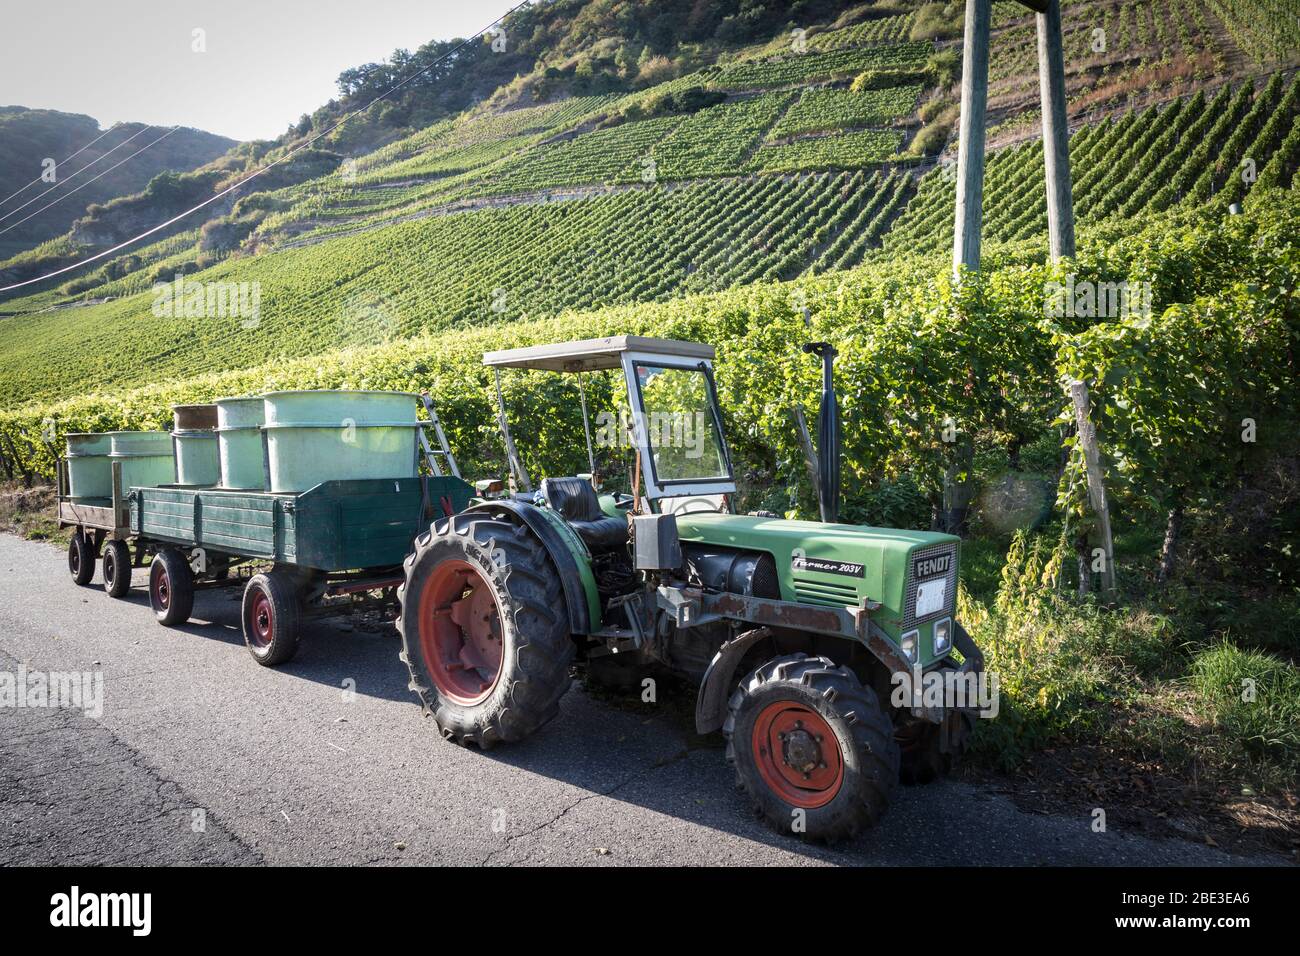 Tractor towing two trailers each with large bins for collecting the grape harvest below a vineyard in Piesport, Germany. Stock Photo